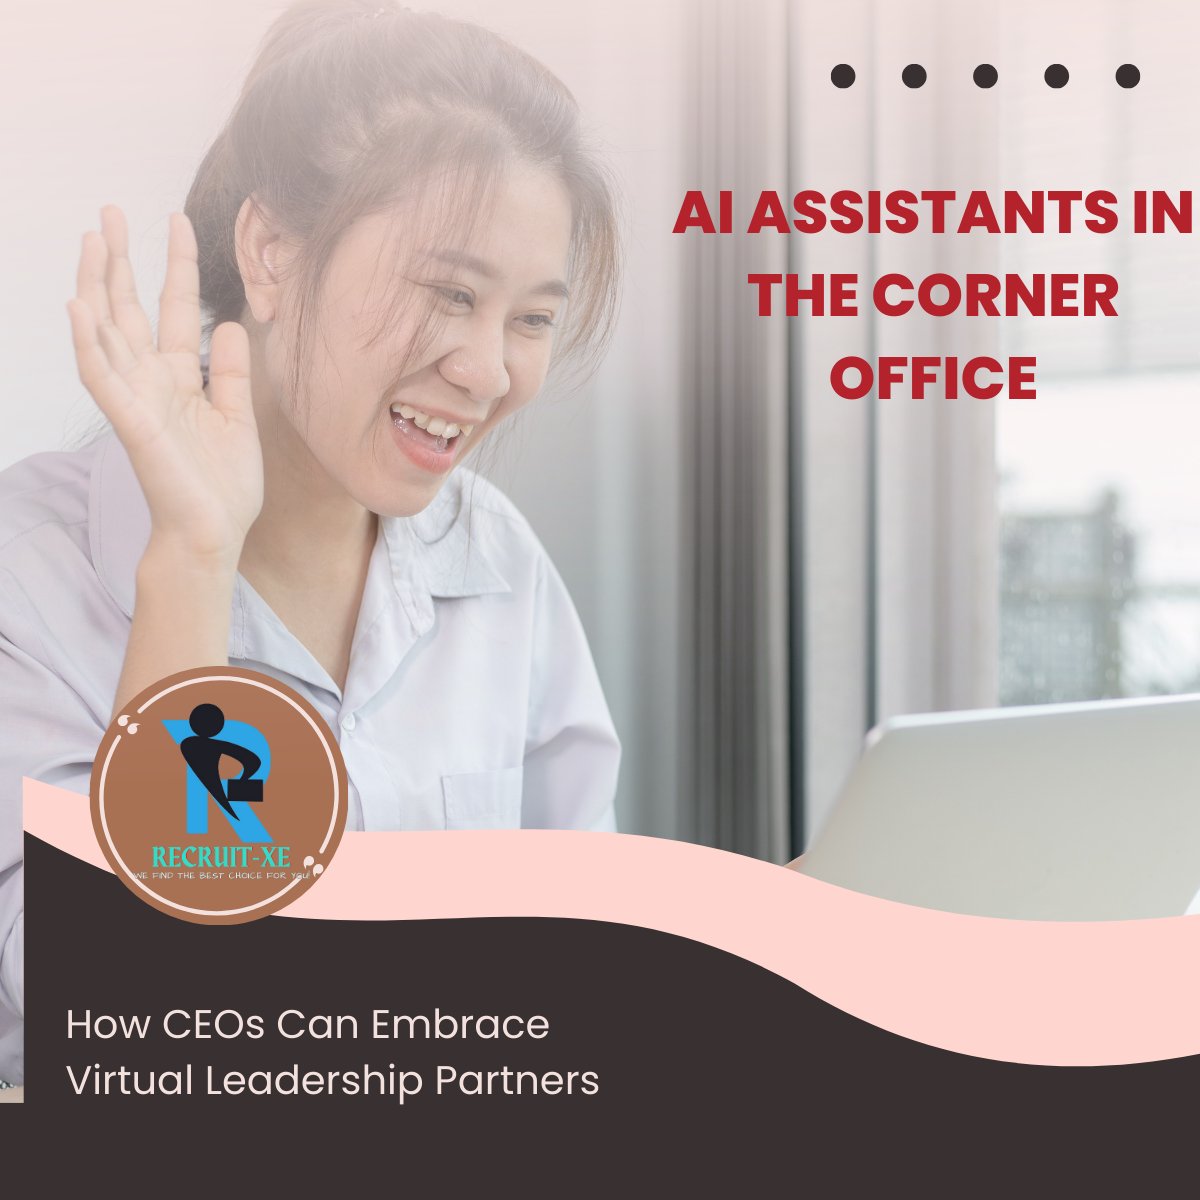 AI assistants and virtual tools are becoming invaluable allies for CEOs, enhancing productivity and decision-making.
#AIAssistants #VirtualLeadership #CEOProductivity #AIinDecisionMaking #FutureOfWork